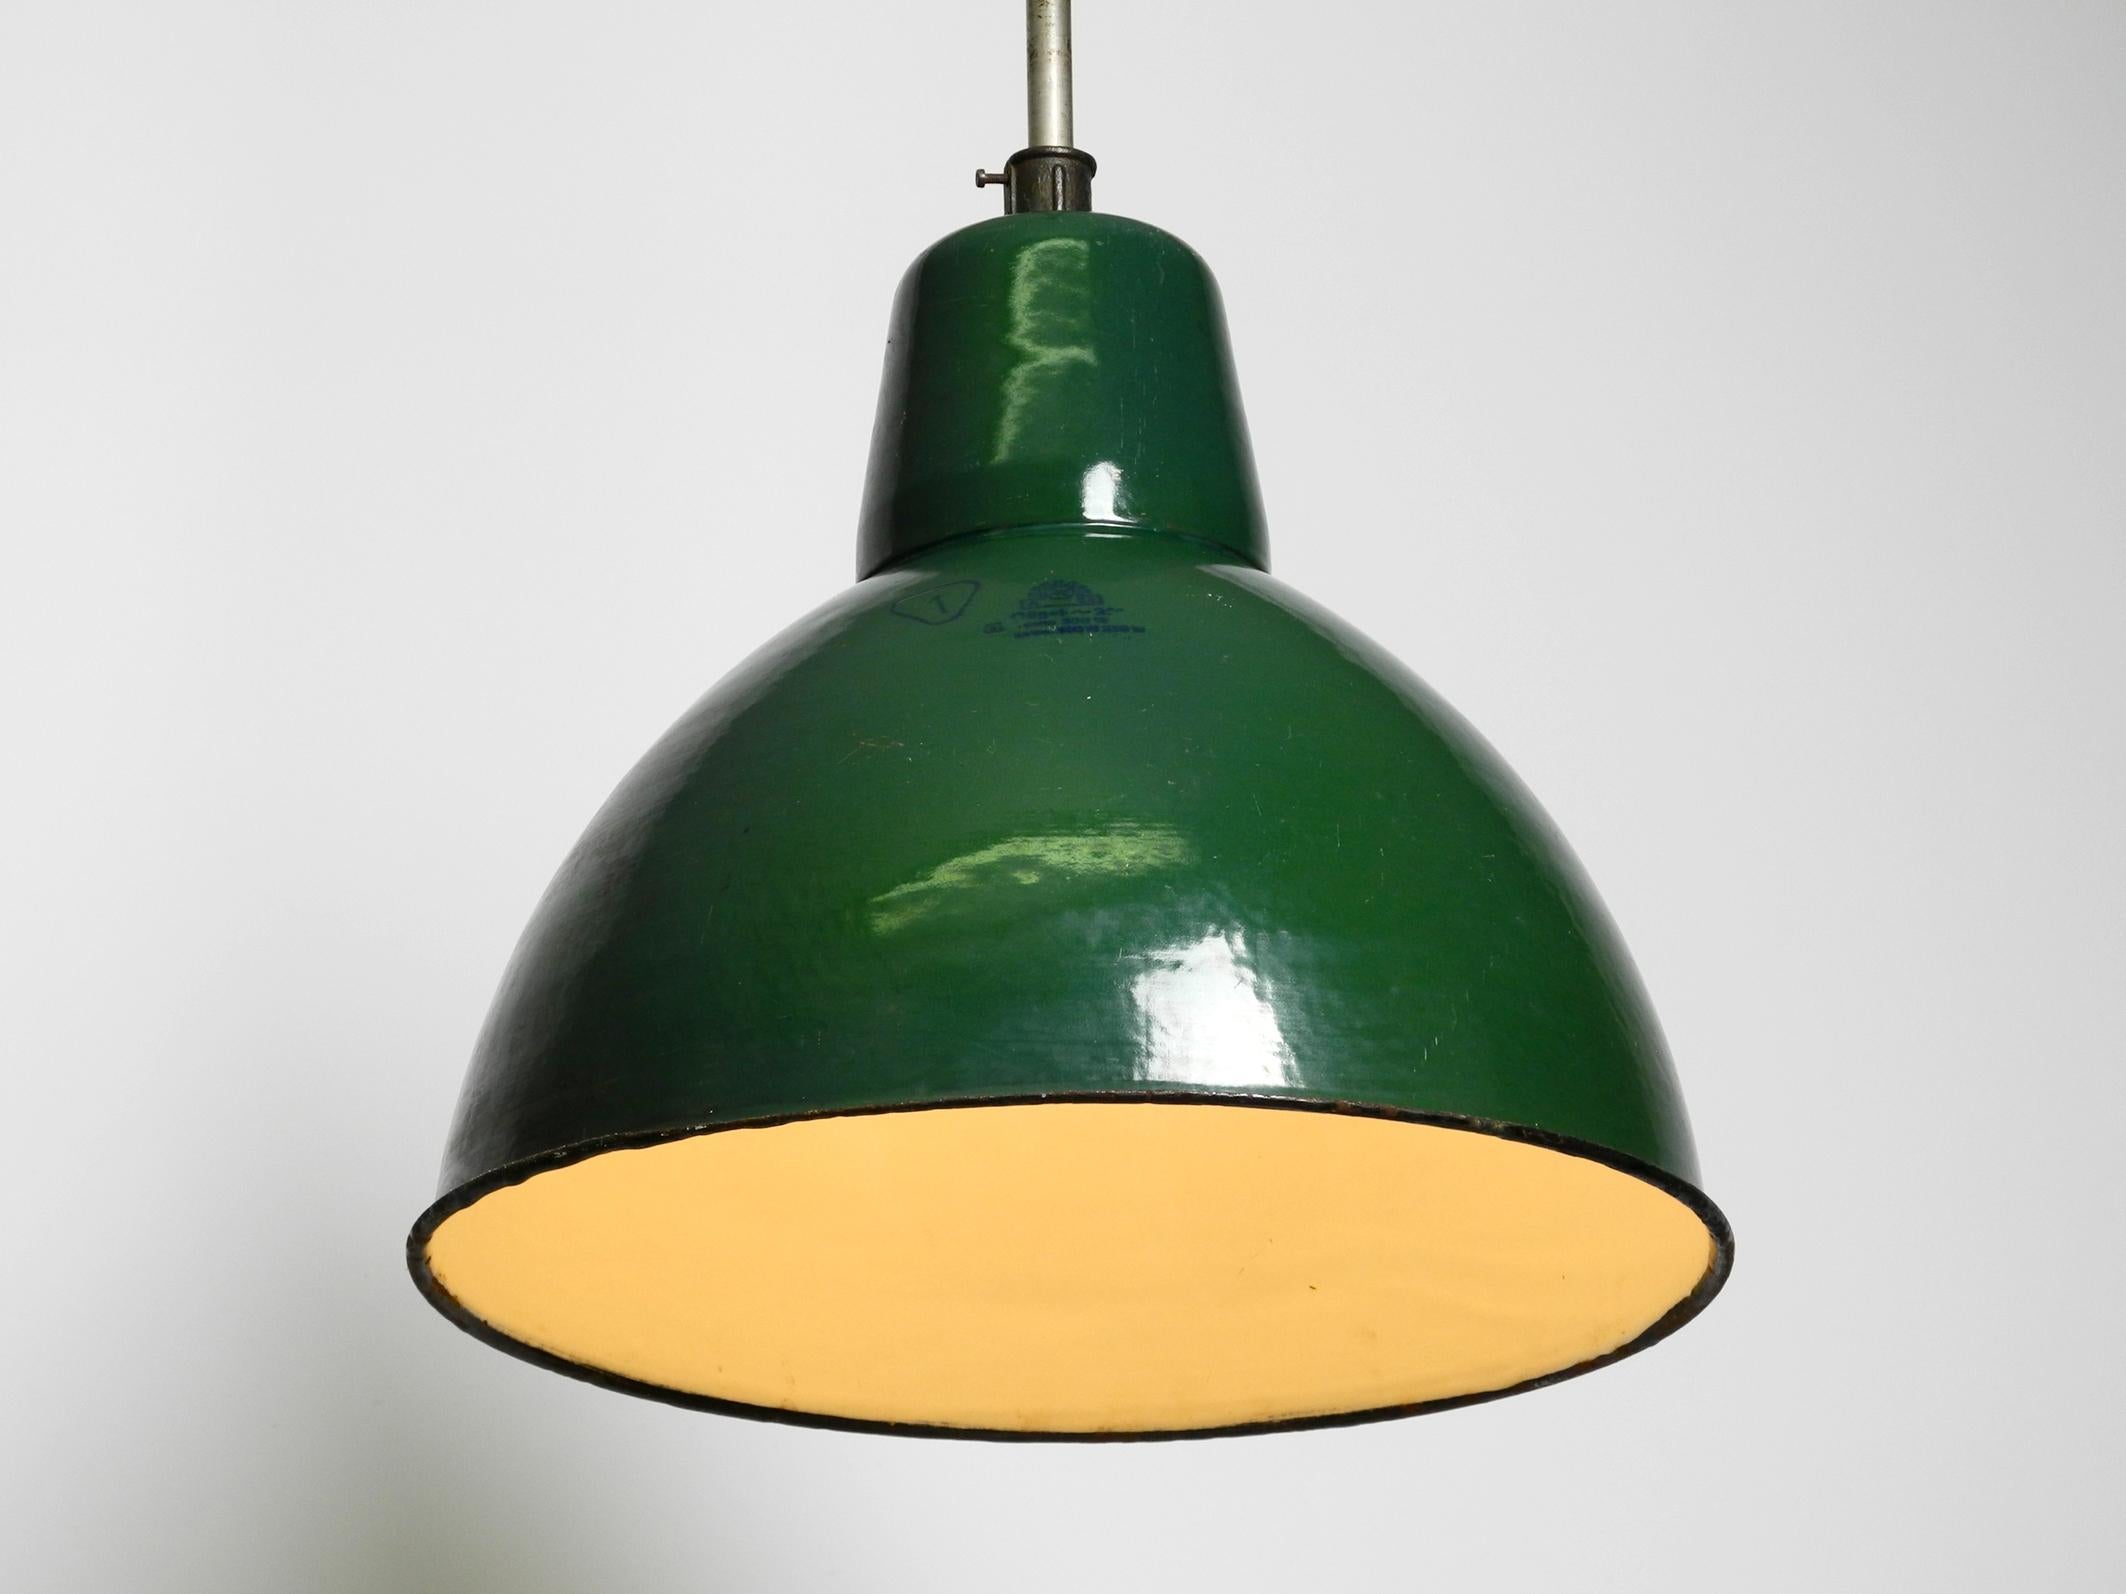 Beautiful mid century Industrial enameled metal factory lamp from France.
Glossy dark green surface, white inside. Good vintage condition with great patina.
100% original condition. Fully functional.
Cable renewed due to age. With original E40